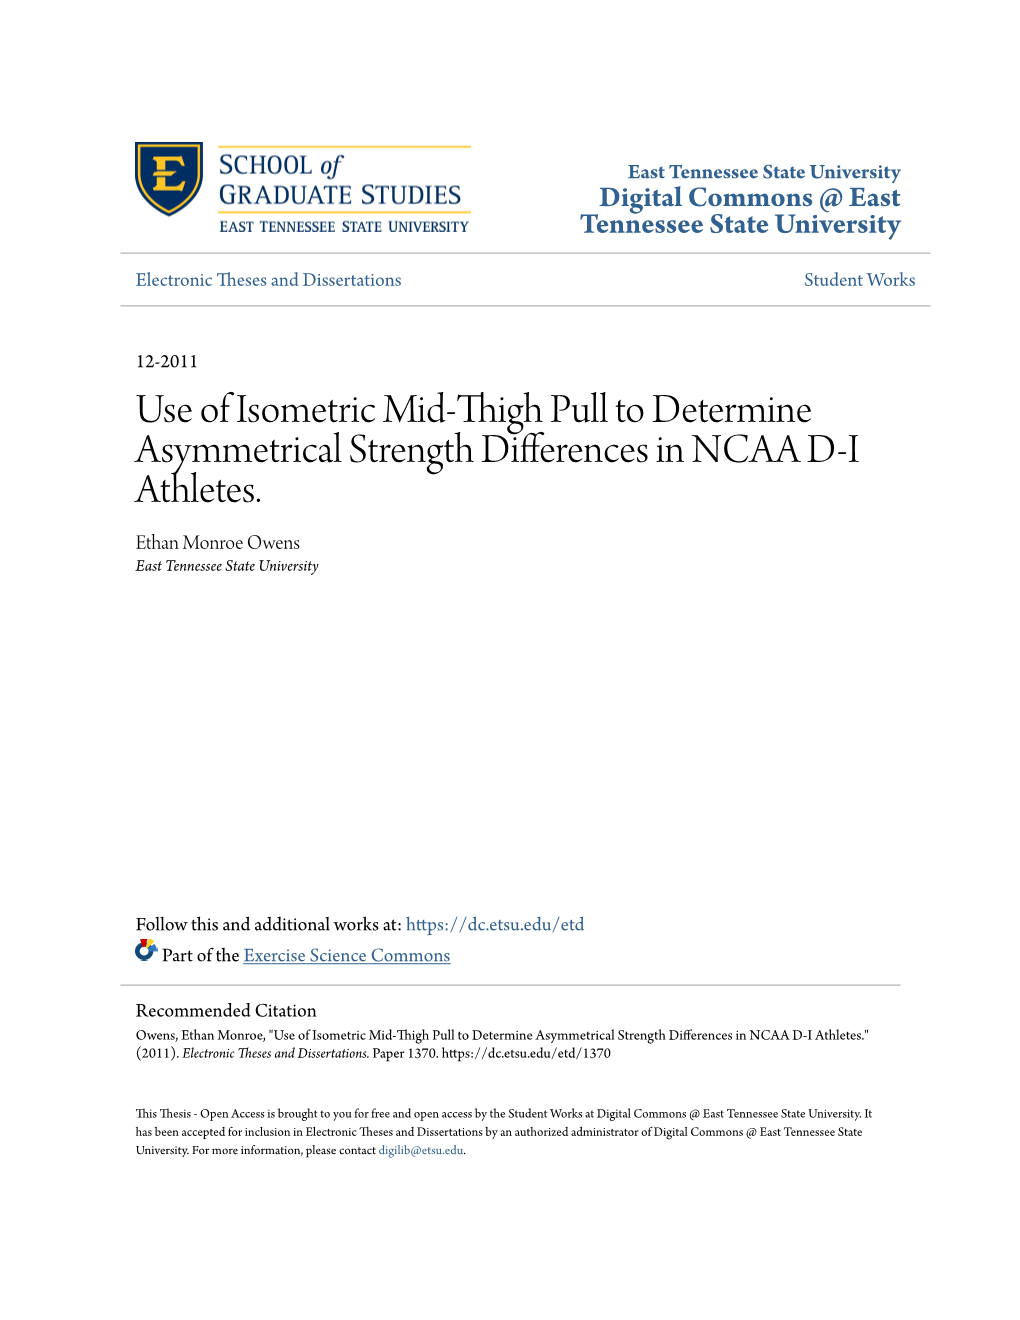 Use of Isometric Mid-Thigh Pull to Determine Asymmetrical Strength Differences in NCAA D-I Athletes